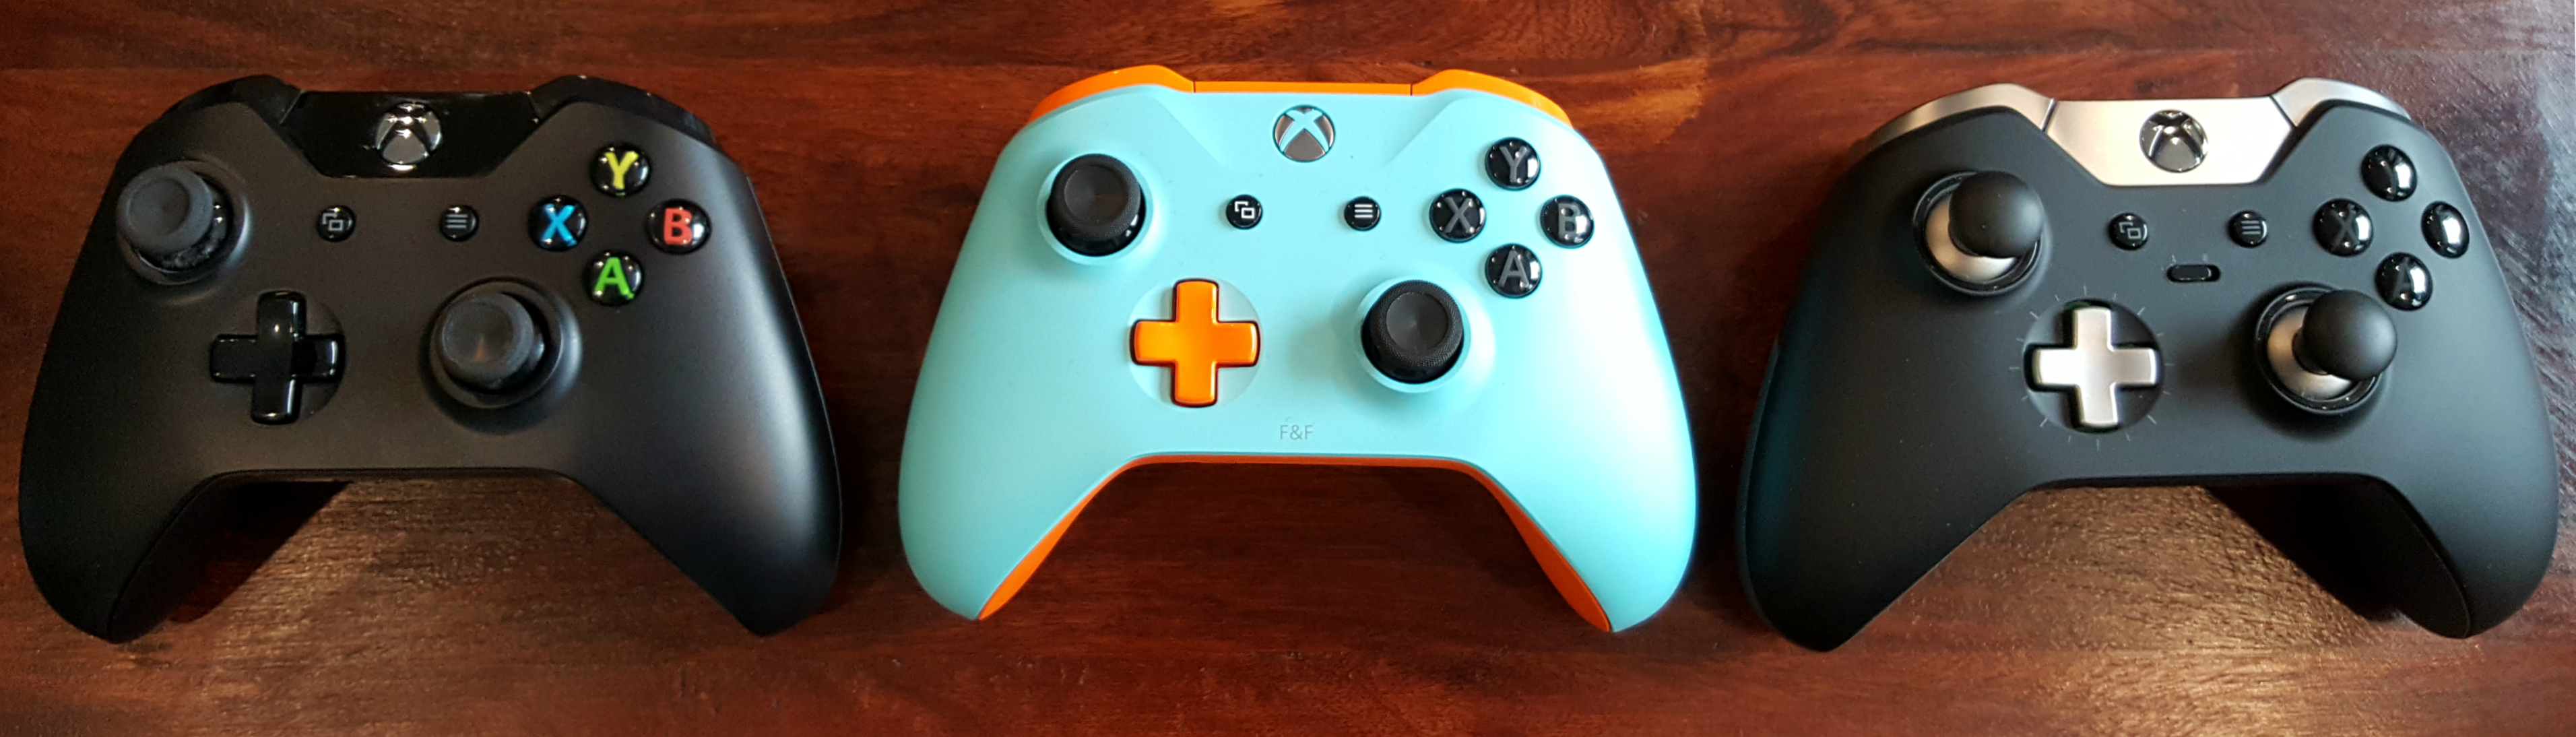 standard xbox one controller